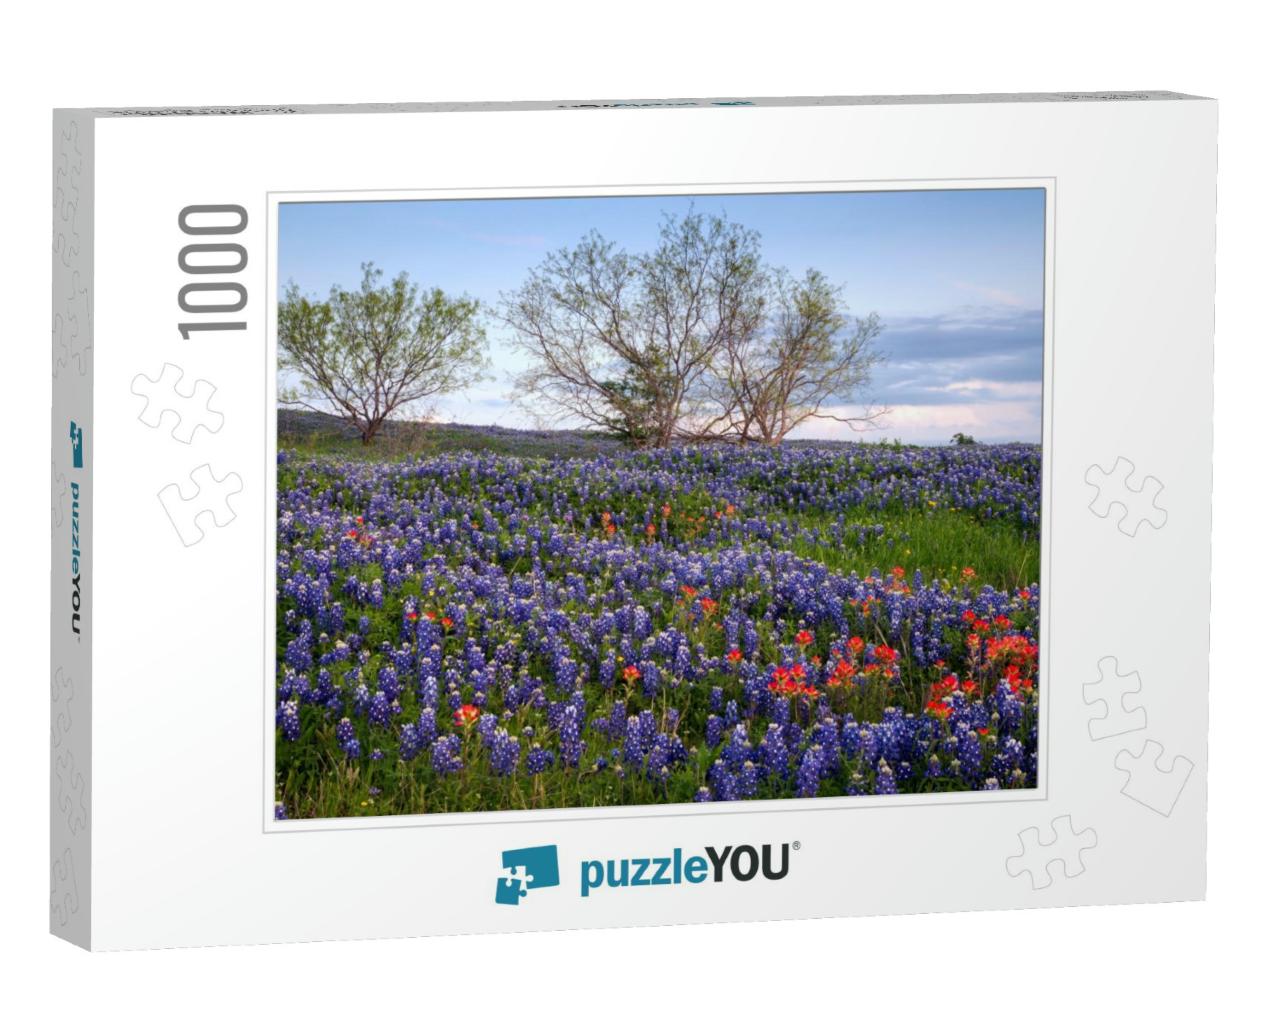 Bluebonnet Filled Meadow on the Ennis Bluebonnet Trail in... Jigsaw Puzzle with 1000 pieces